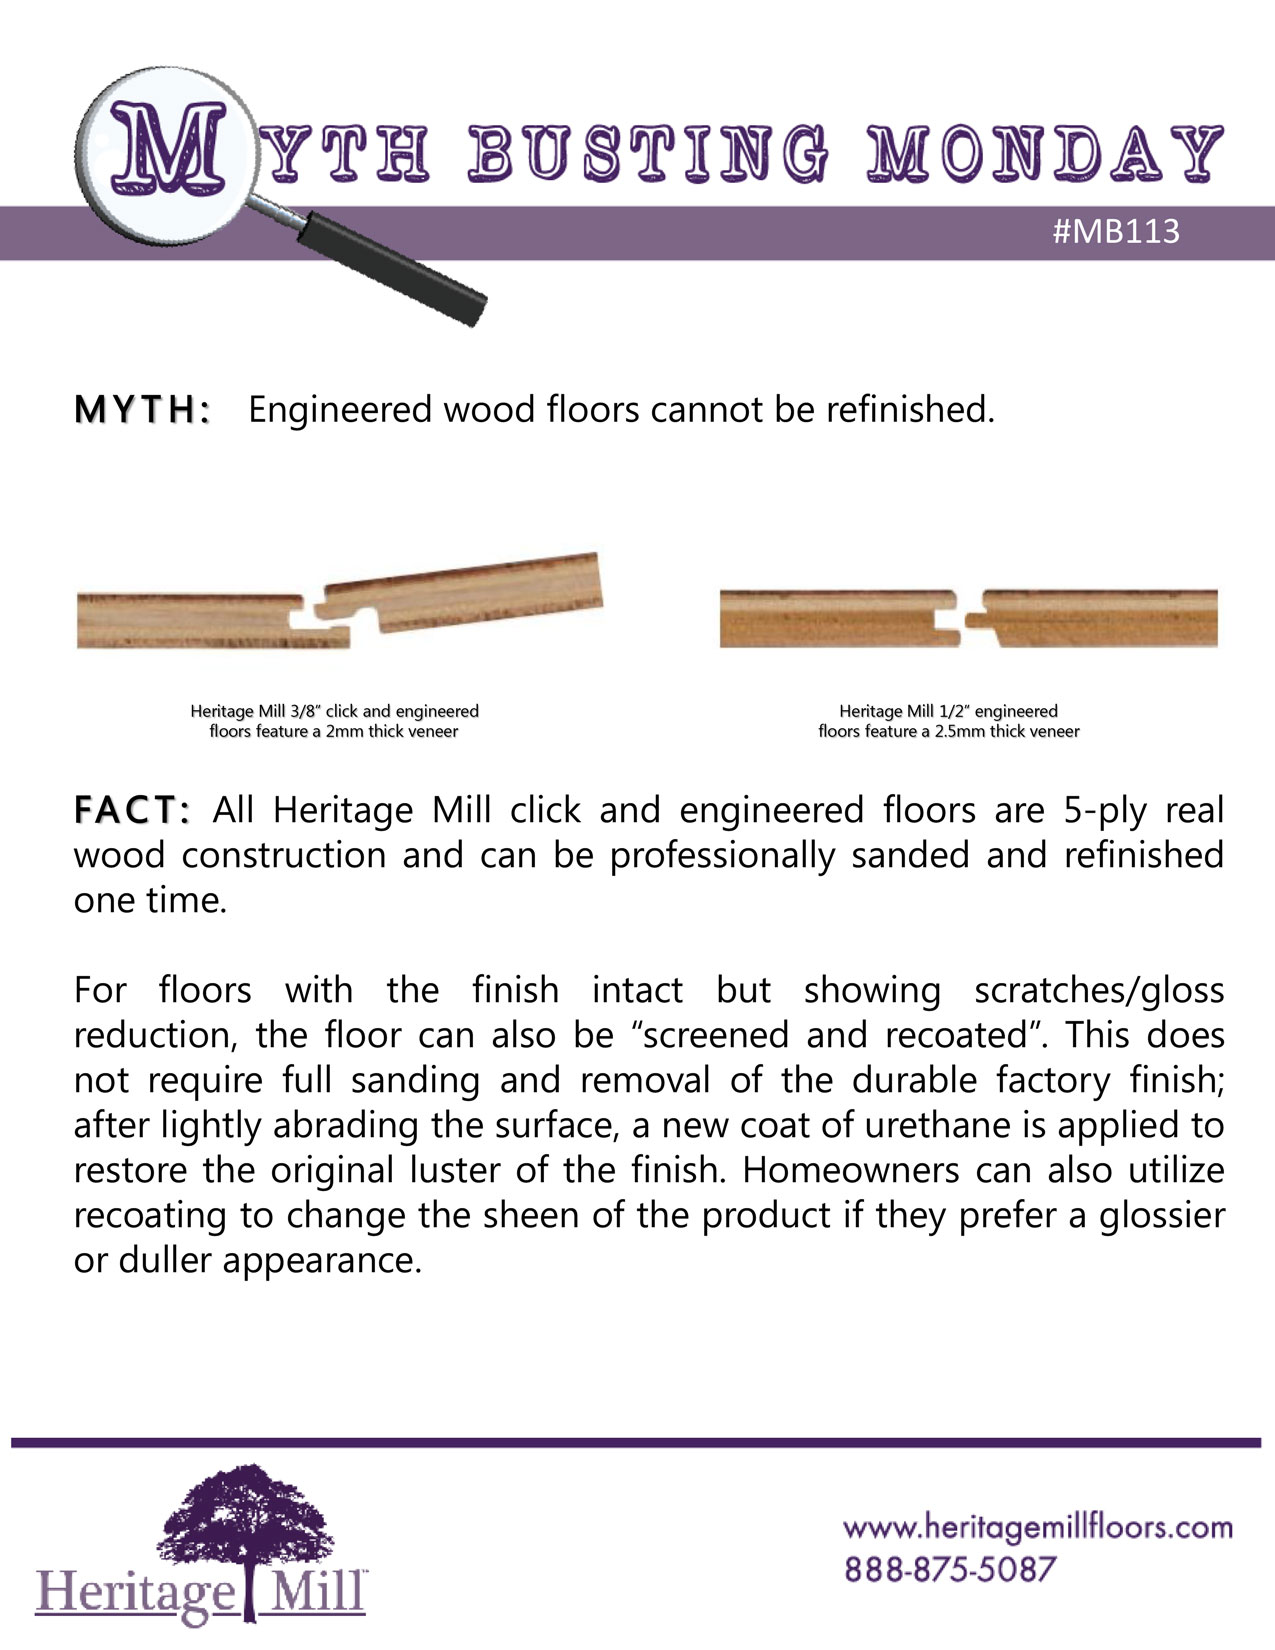 Engineered wood floors cannot be refinished.